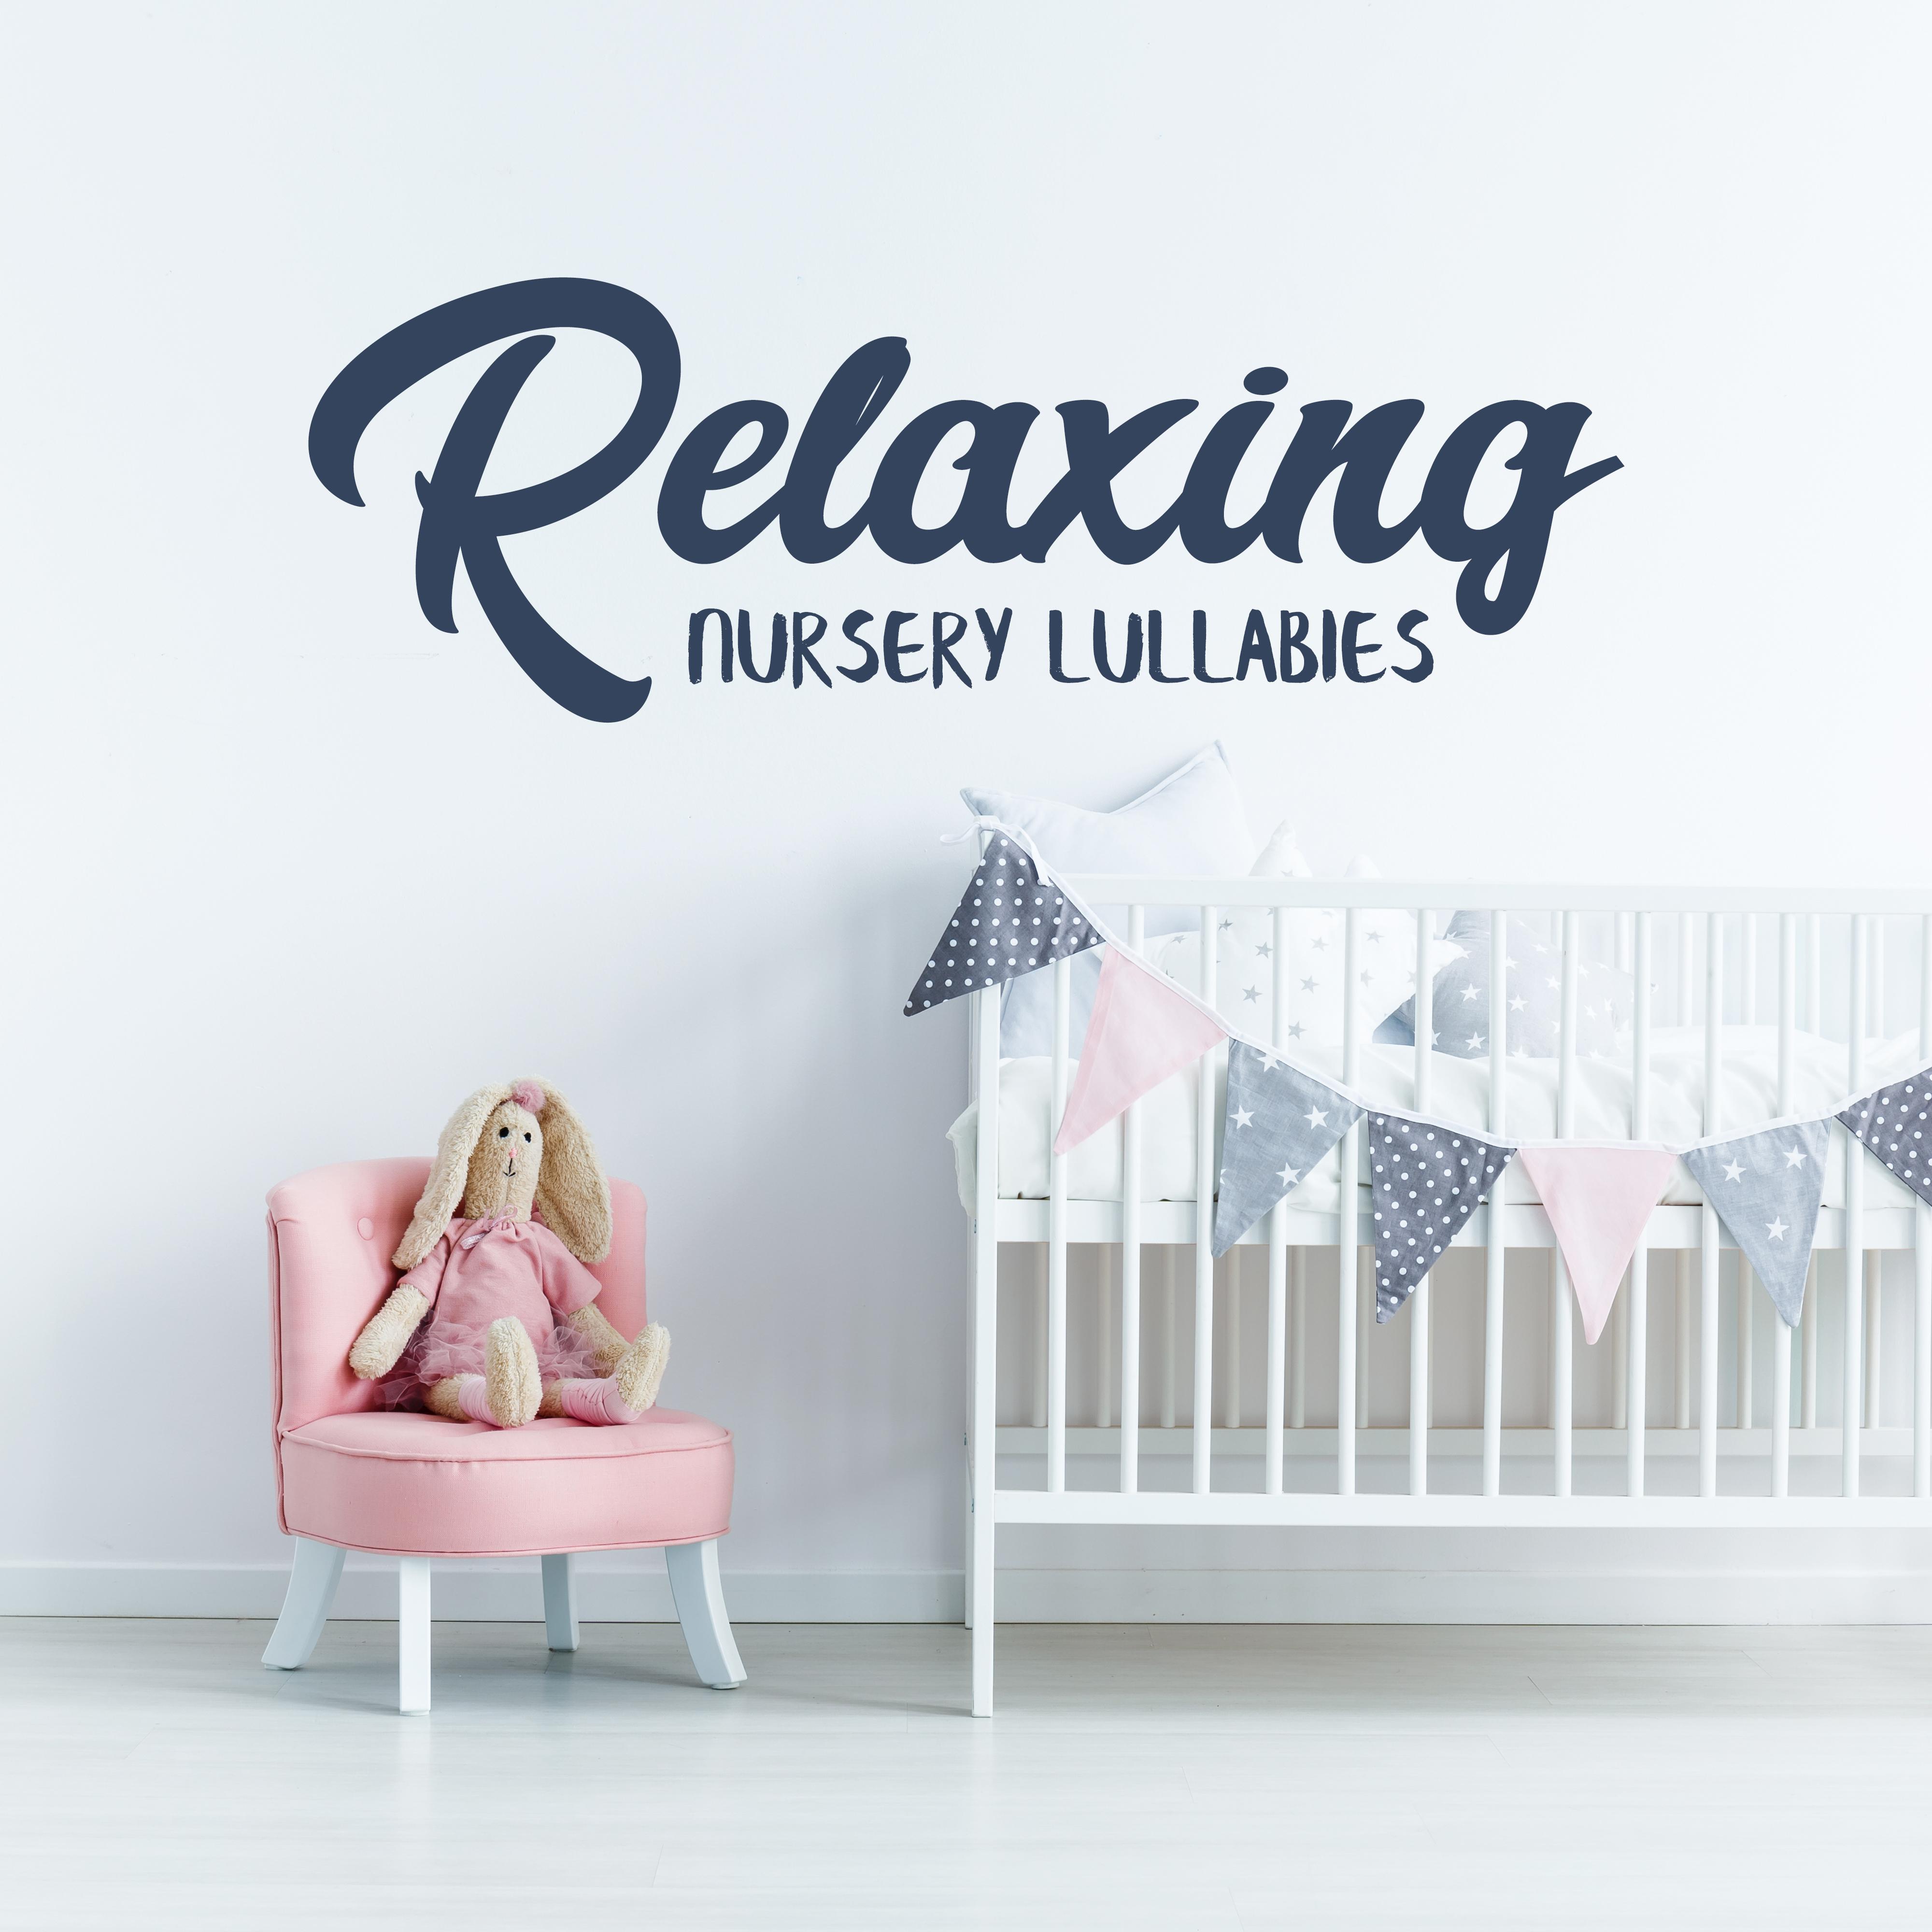 Relaxing Nursery Lullabies – Peaceful Sounds for Baby, Soothing Lullabies, Bedtime Baby, Reduce Stress, Sweet Tunes for Kids